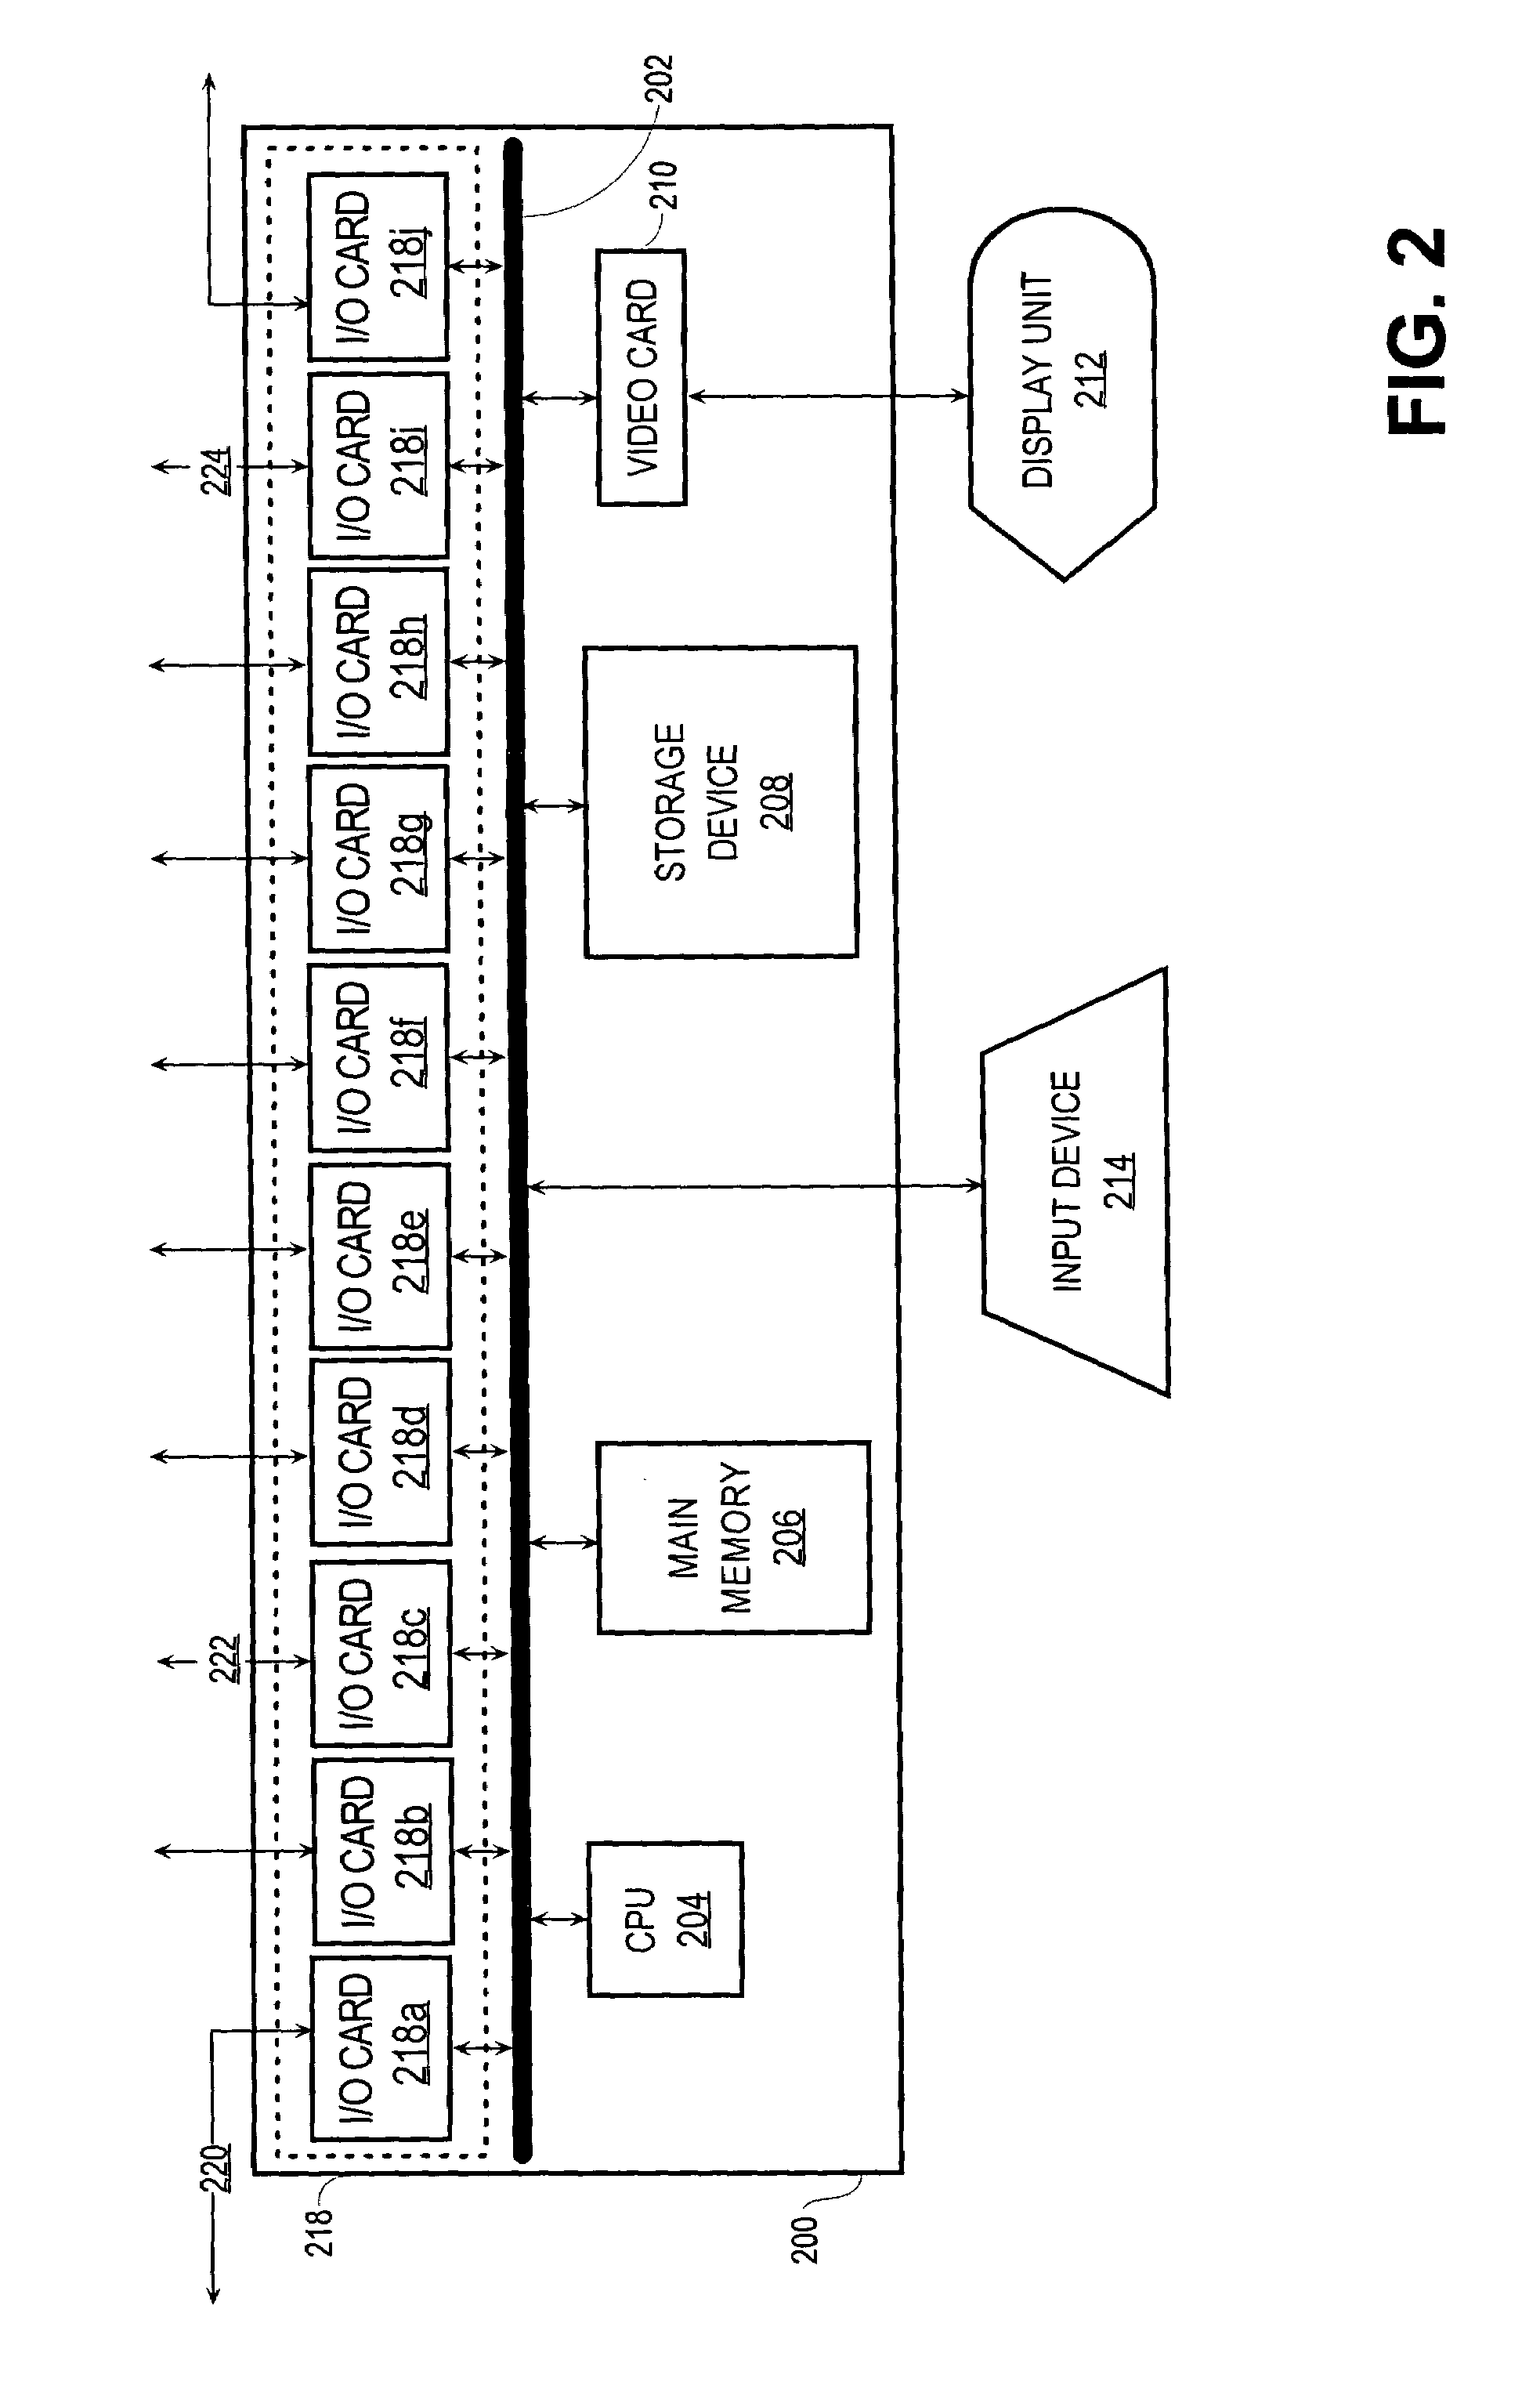 System using a signaling protocol for controlling voice calls originating in a circuit switching telephone network and routed over a packet switching network